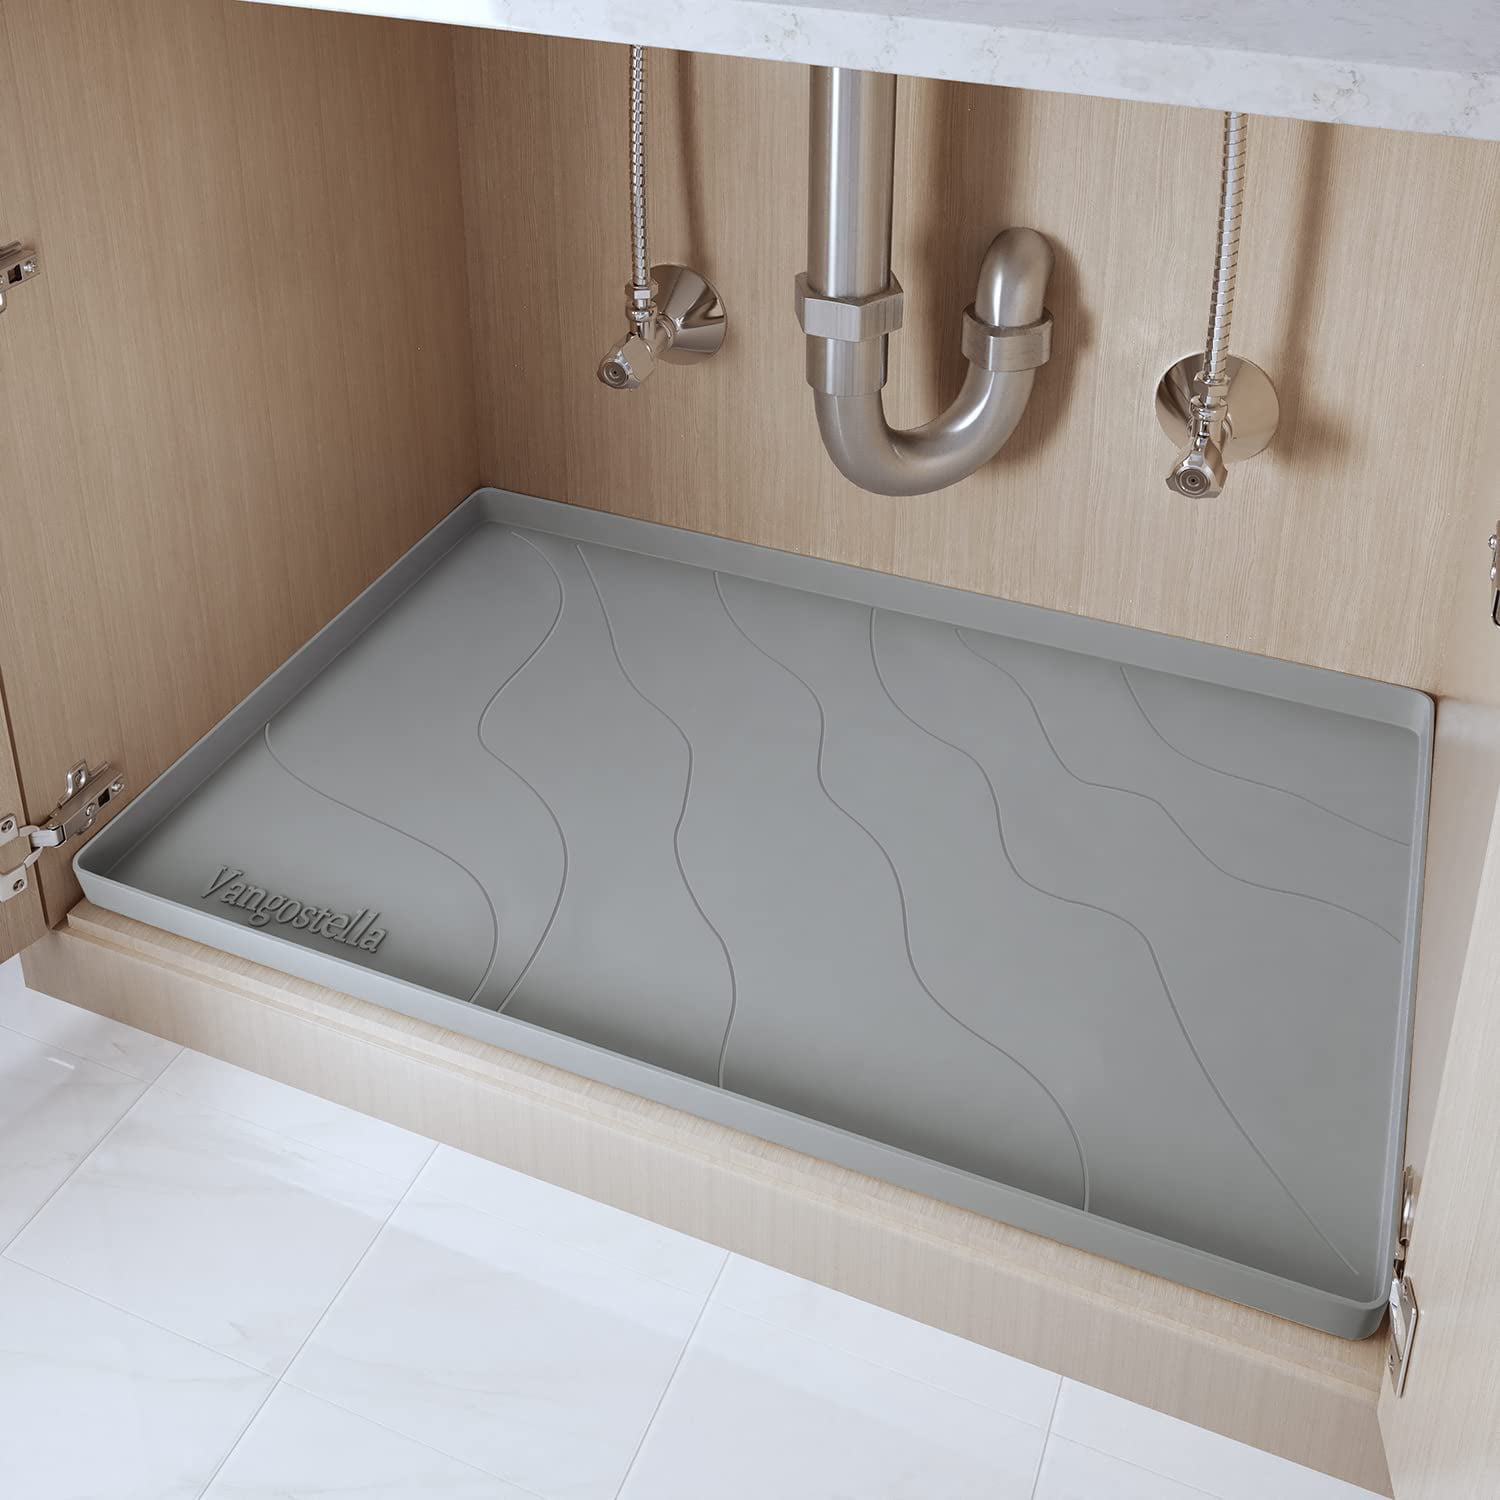 Kitchen Under Sink Mats Waterproof - 34 x 22 Non-Slip Silicone Bathroom  Cabinet Drip Tray, Raised Edge Hold up to 3.3 Gallons Liquid Protector for  Drips Leaks…